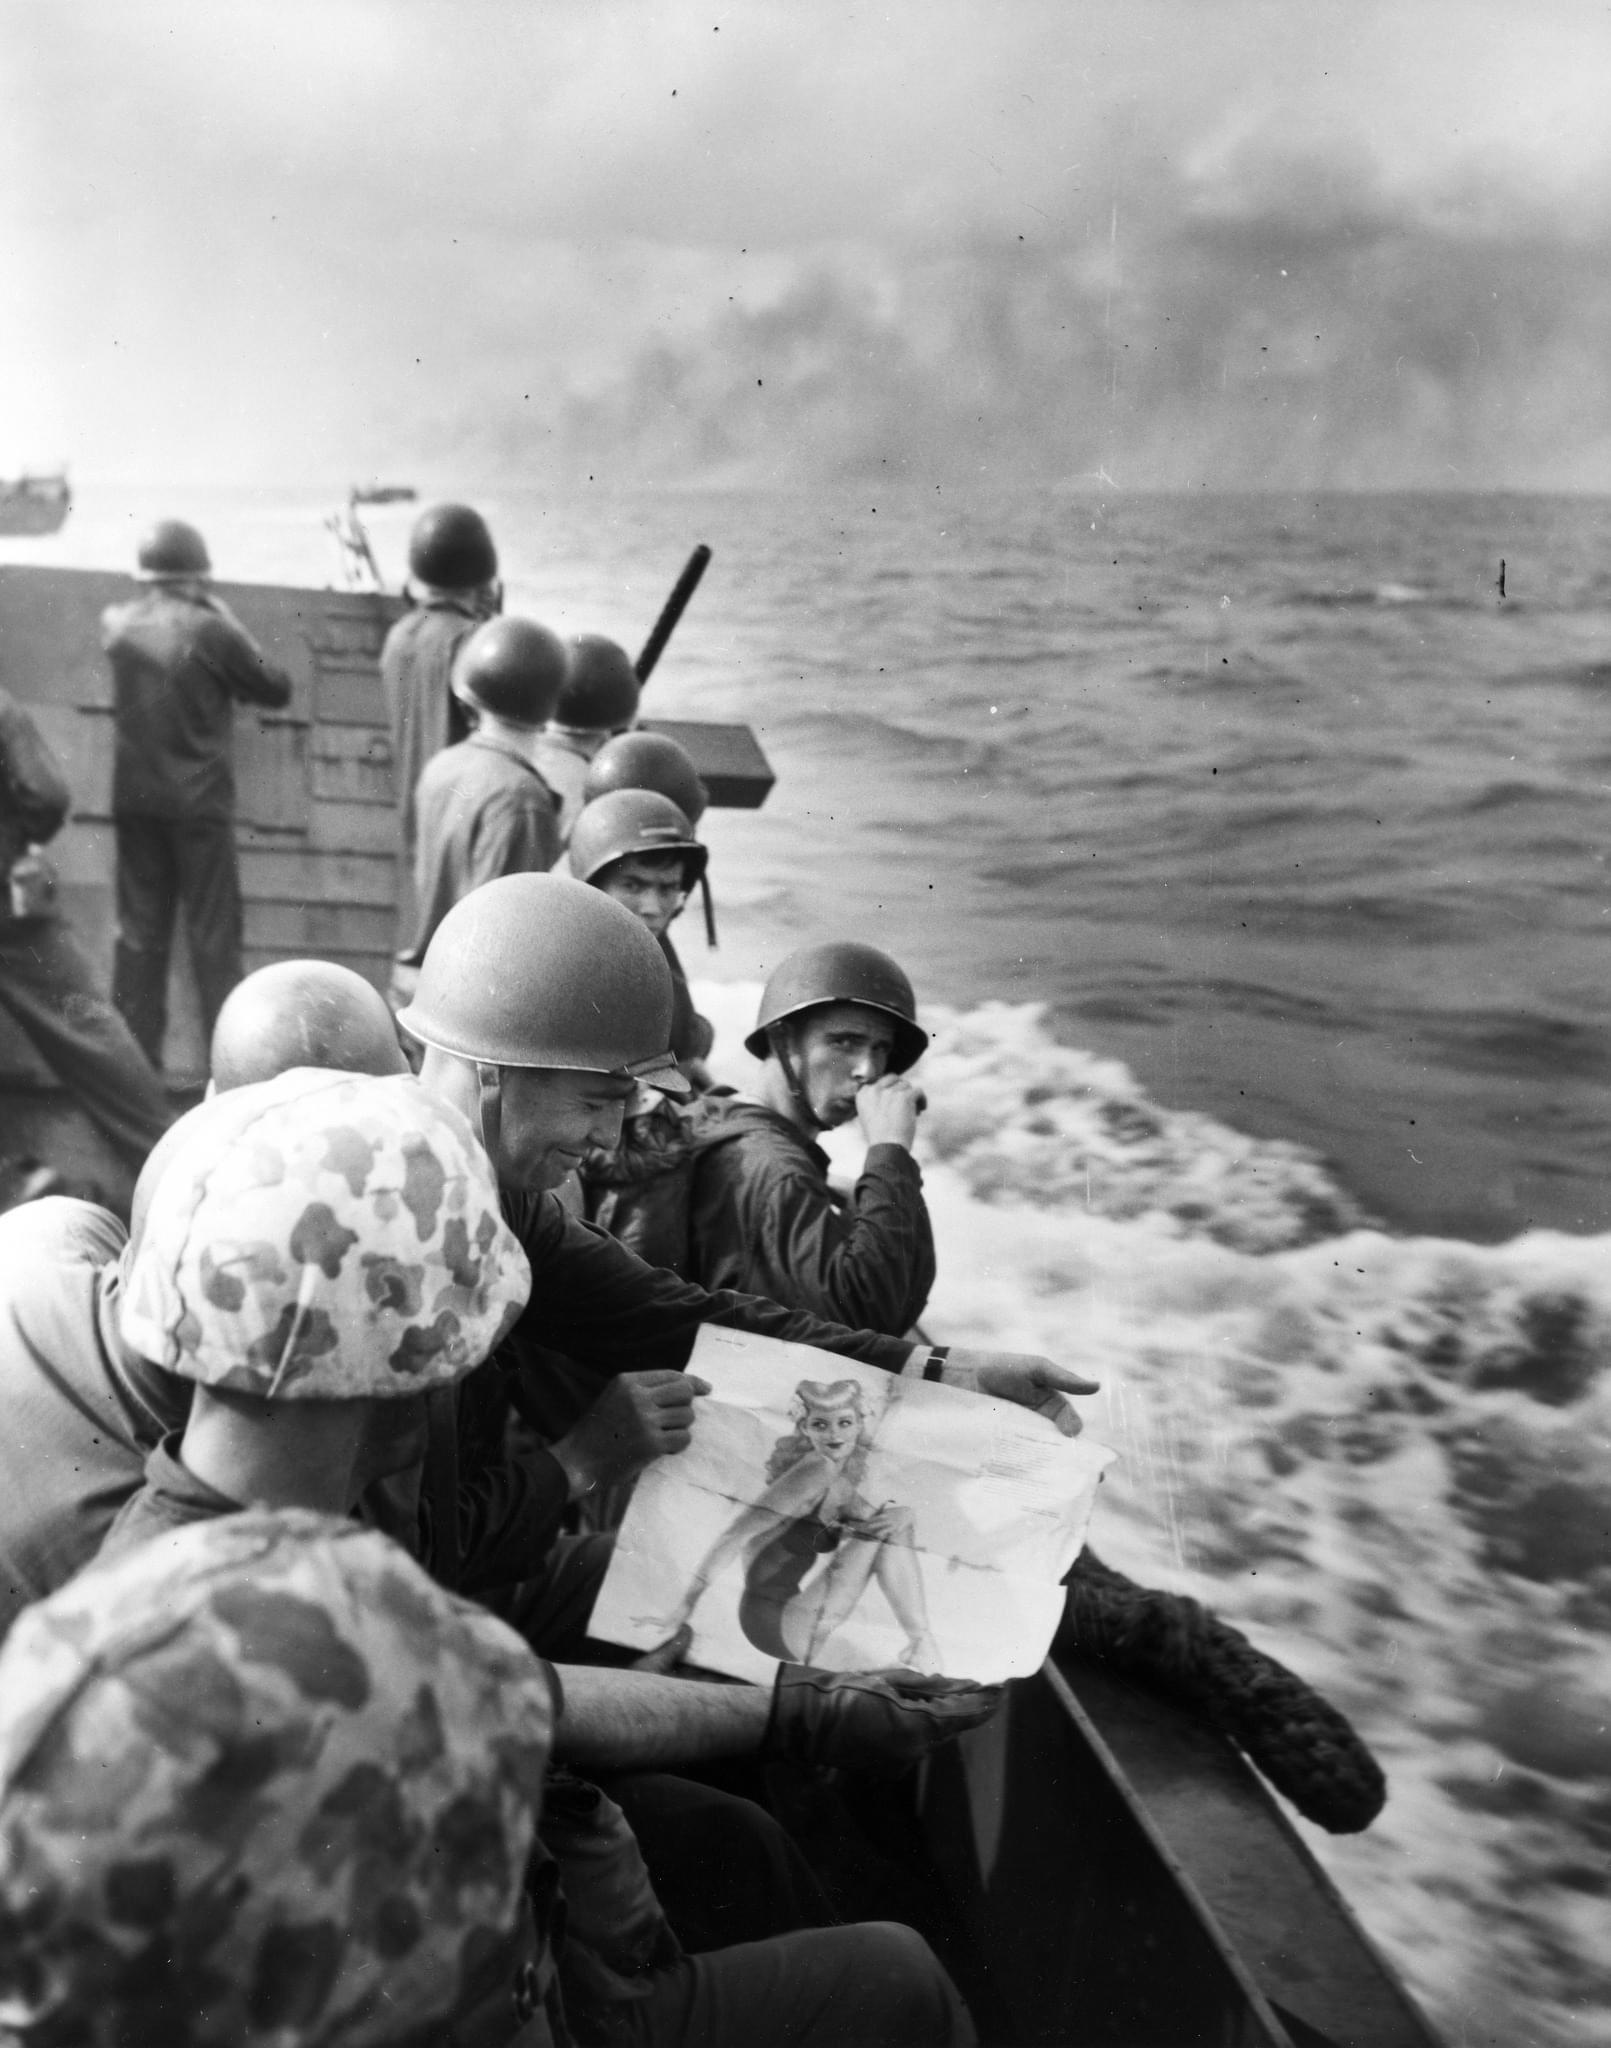 'Where Marines Go, Their Pin-ups Go.' U.S. Marines on a landing craft approaching Tarawa, Gilbert Islands. One of the Marines shows a picture of a pin-up girl to the others, 1943. (National Museum of U.S. Navy).jpg